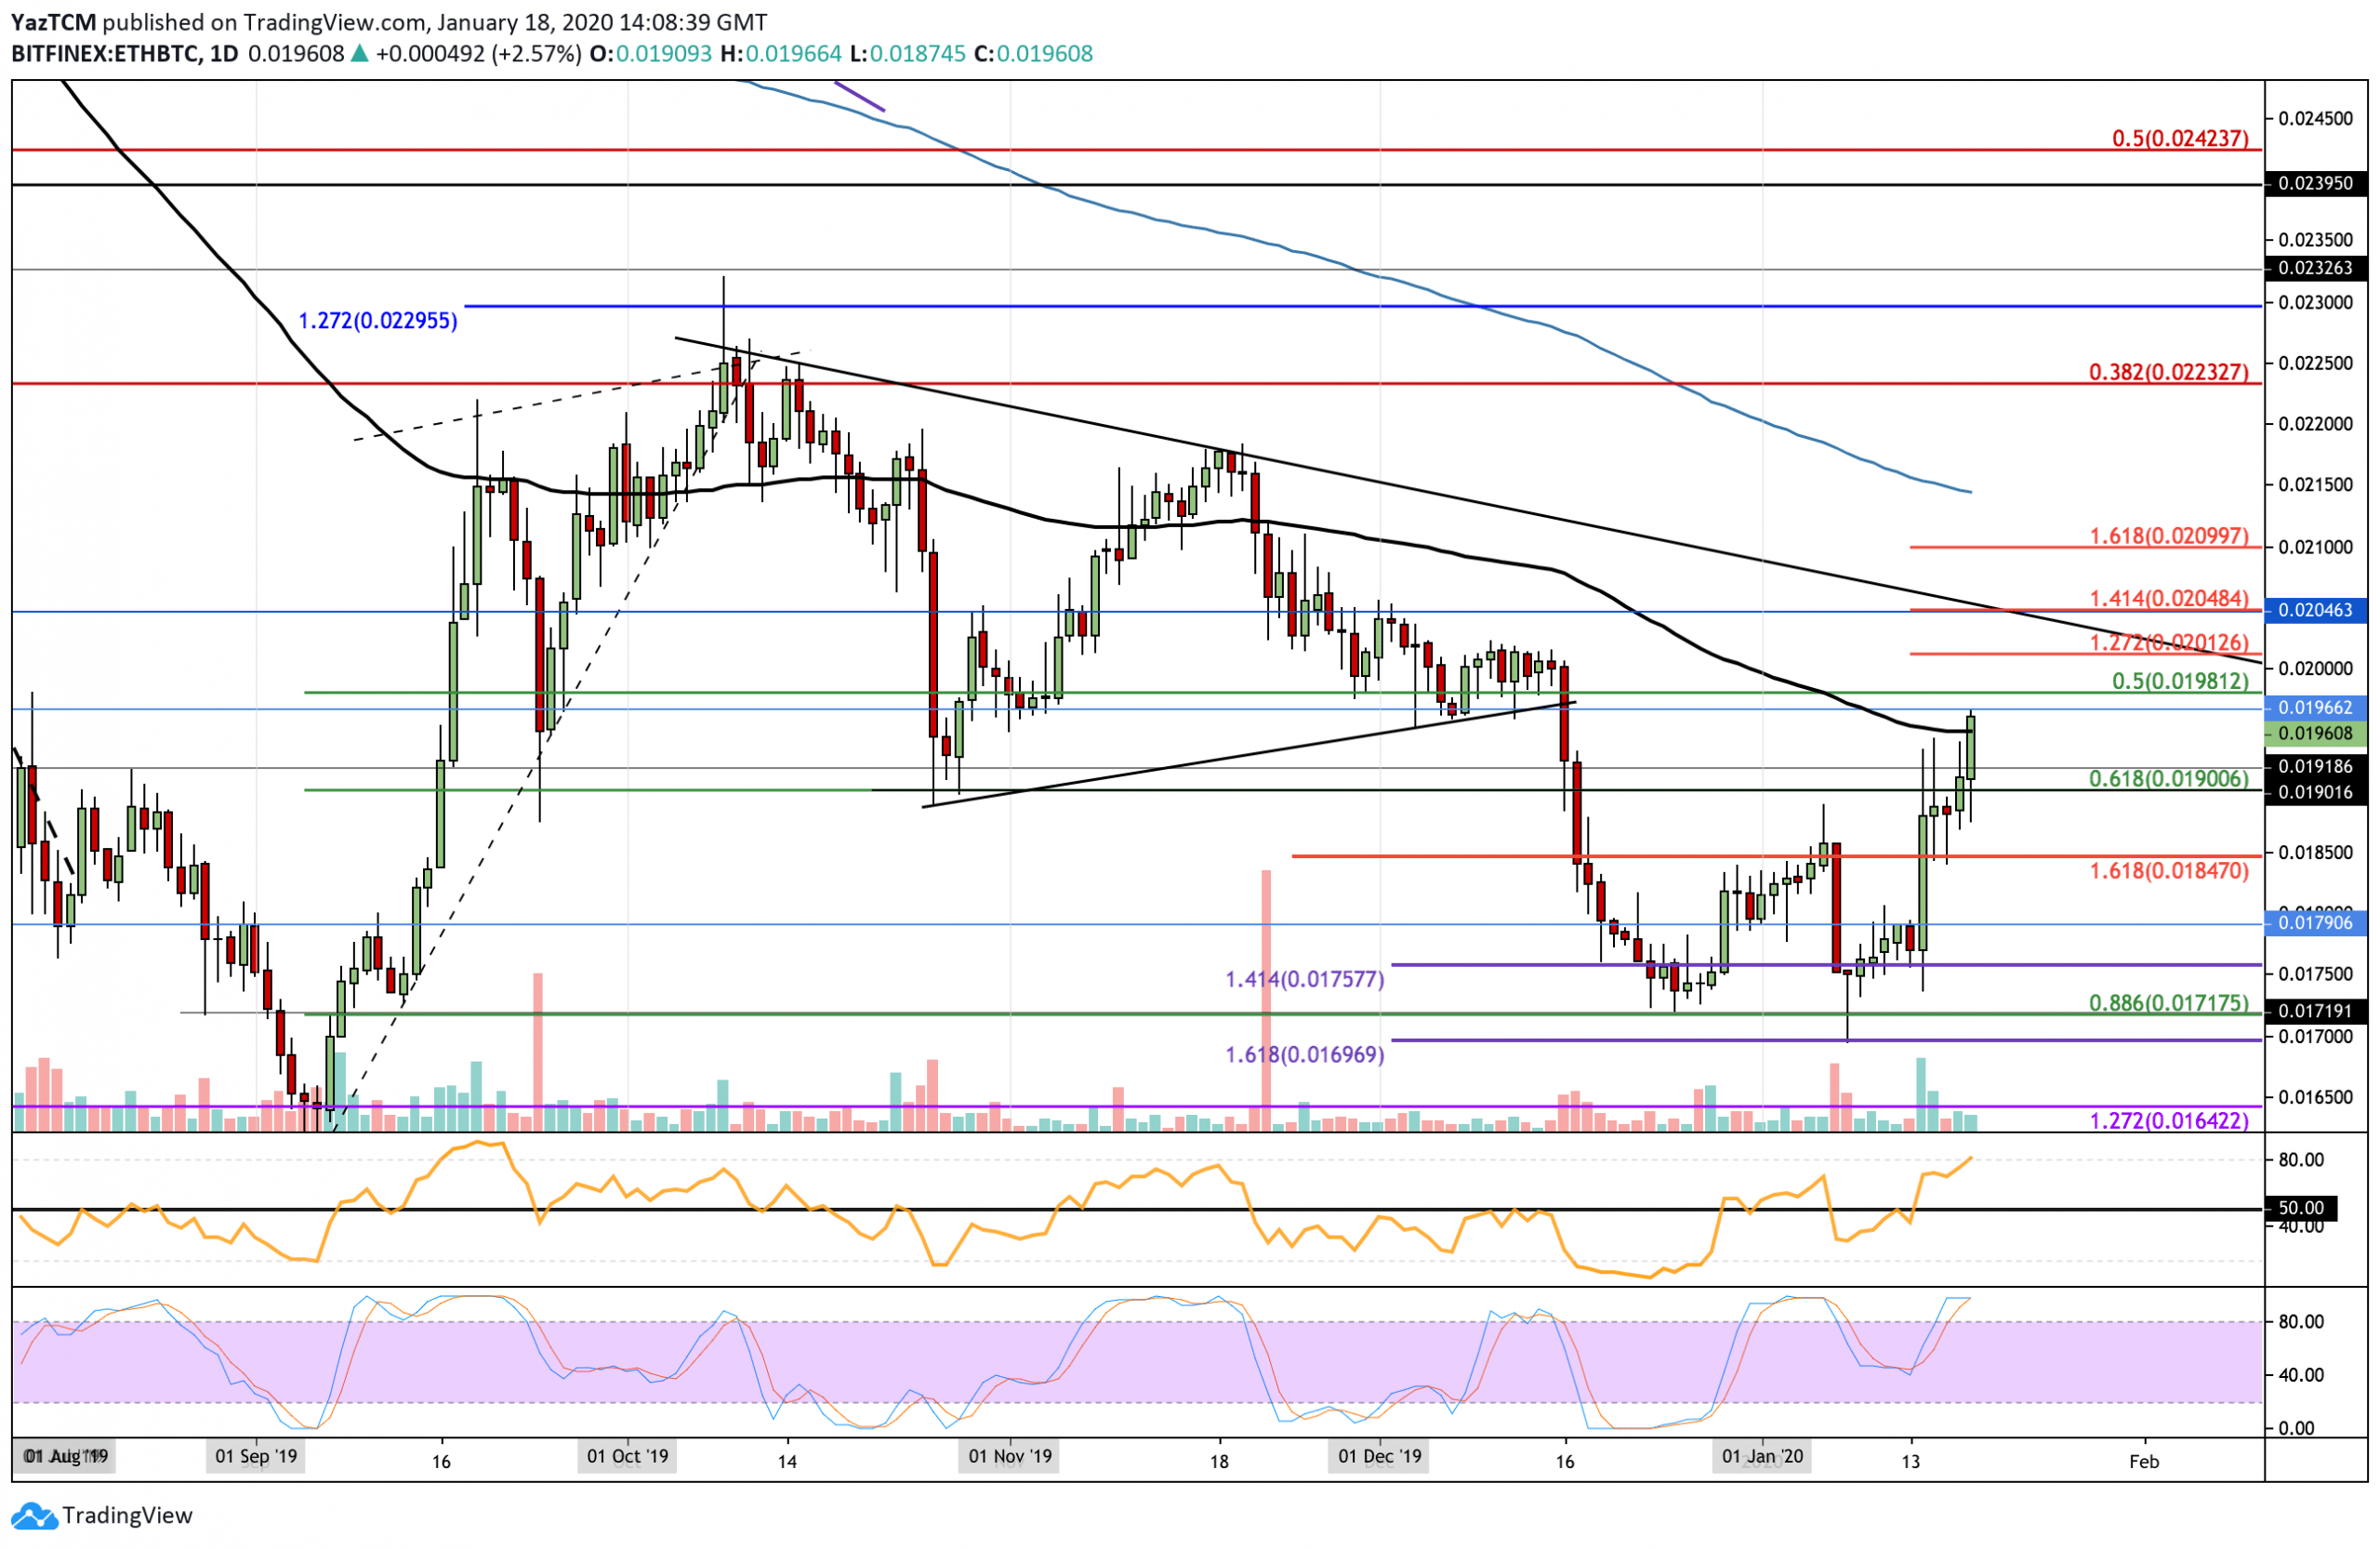 Ethereum Price Analysis: ETH Breaks Above The Crucial MA-200, Soon To Reach $200?